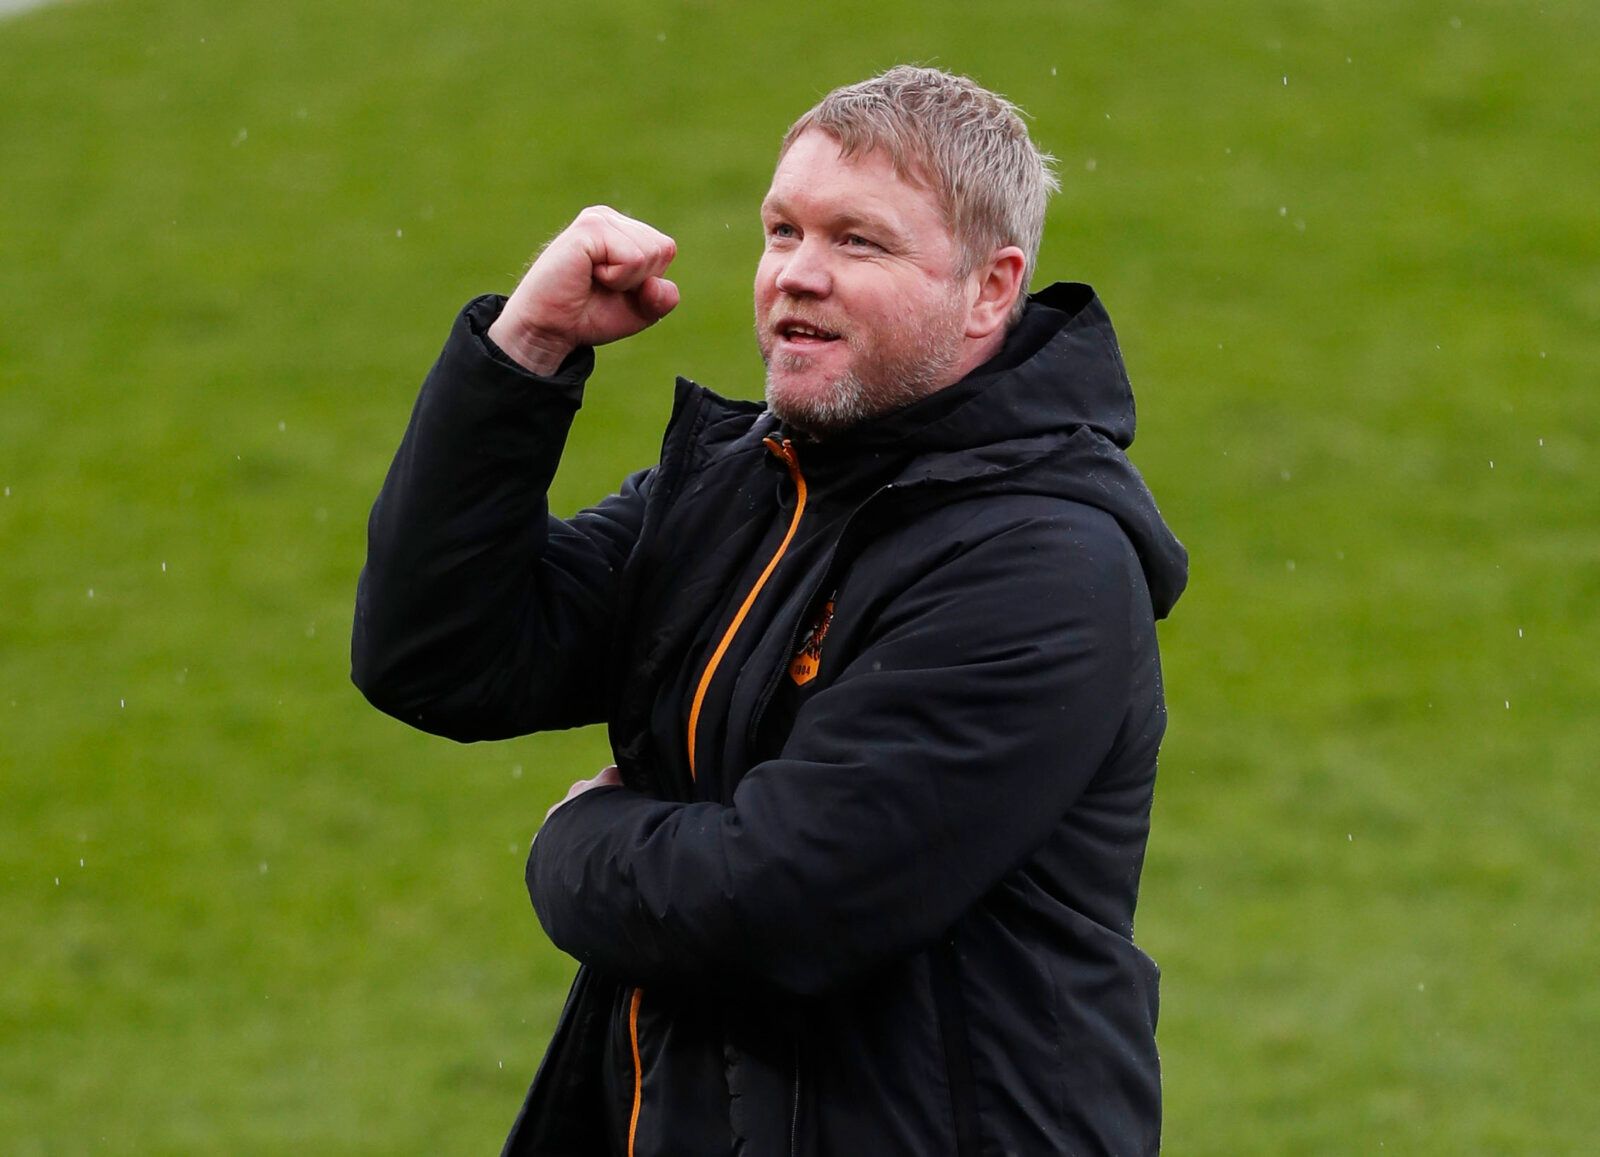 Soccer Football - League One - Hull City v Wigan Athletic - KCOM Stadium, Hull, Britain - May 1, 2021 Hull City manager Grant McCann celebrates winning League One after the match Action Images/Lee Smith EDITORIAL USE ONLY. No use with unauthorized audio, video, data, fixture lists, club/league logos or 'live' services. Online in-match use limited to 75 images, no video emulation. No use in betting, games or single club /league/player publications.  Please contact your account representative for 